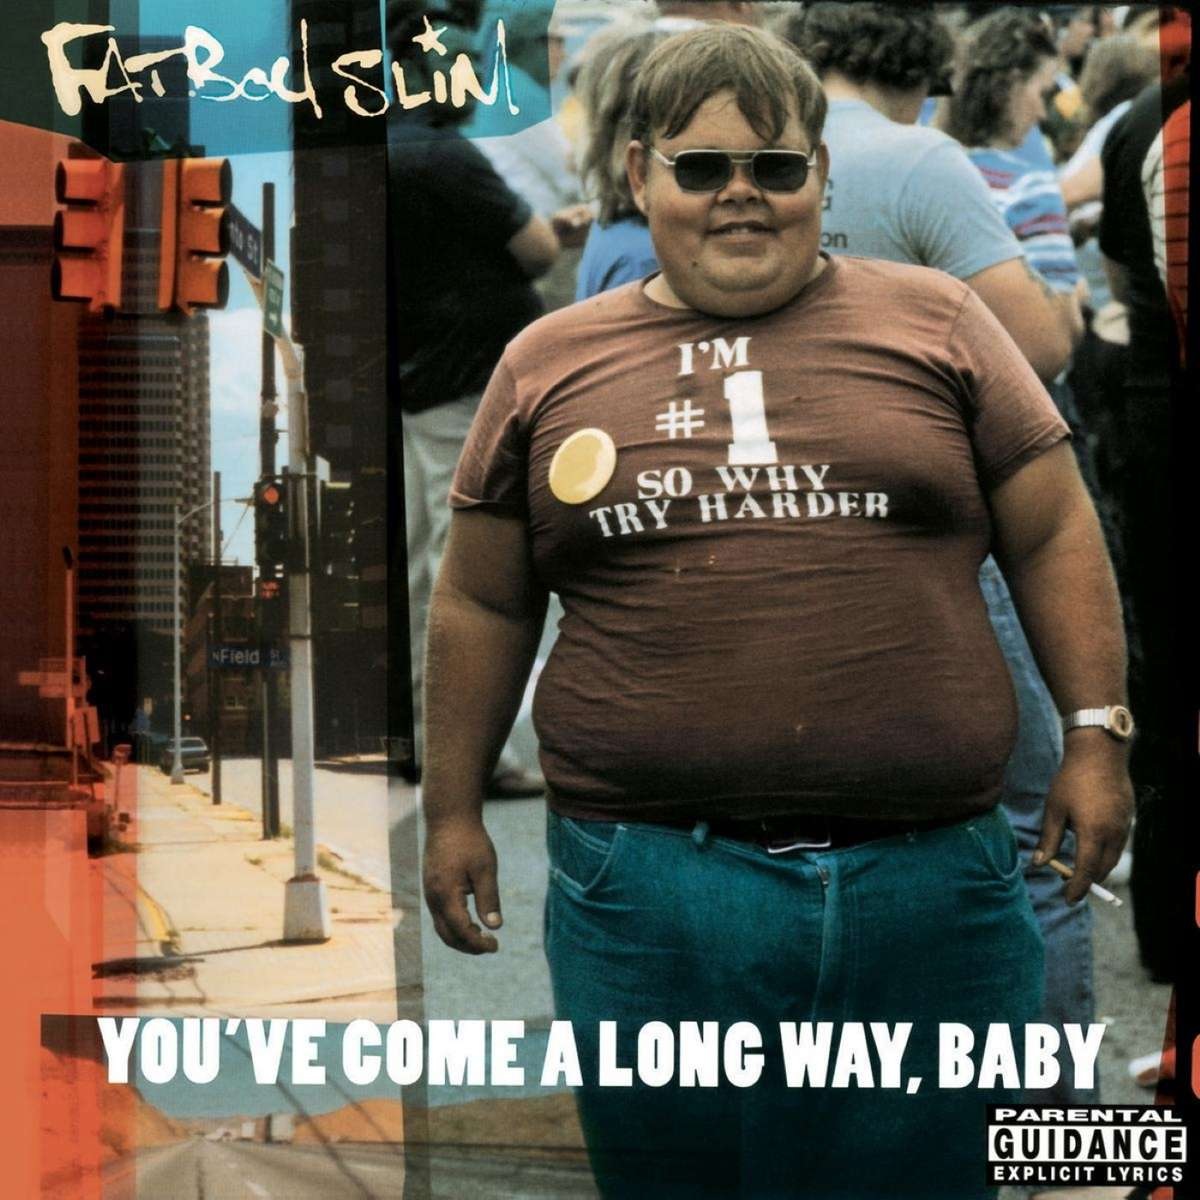 Электроника BMG Rights Fatboy Slim - You've Come a Long Way, Baby (Black Vinyl 2LP) kingdom come deliverance – the amorous adventures of bold sir hans capon pc